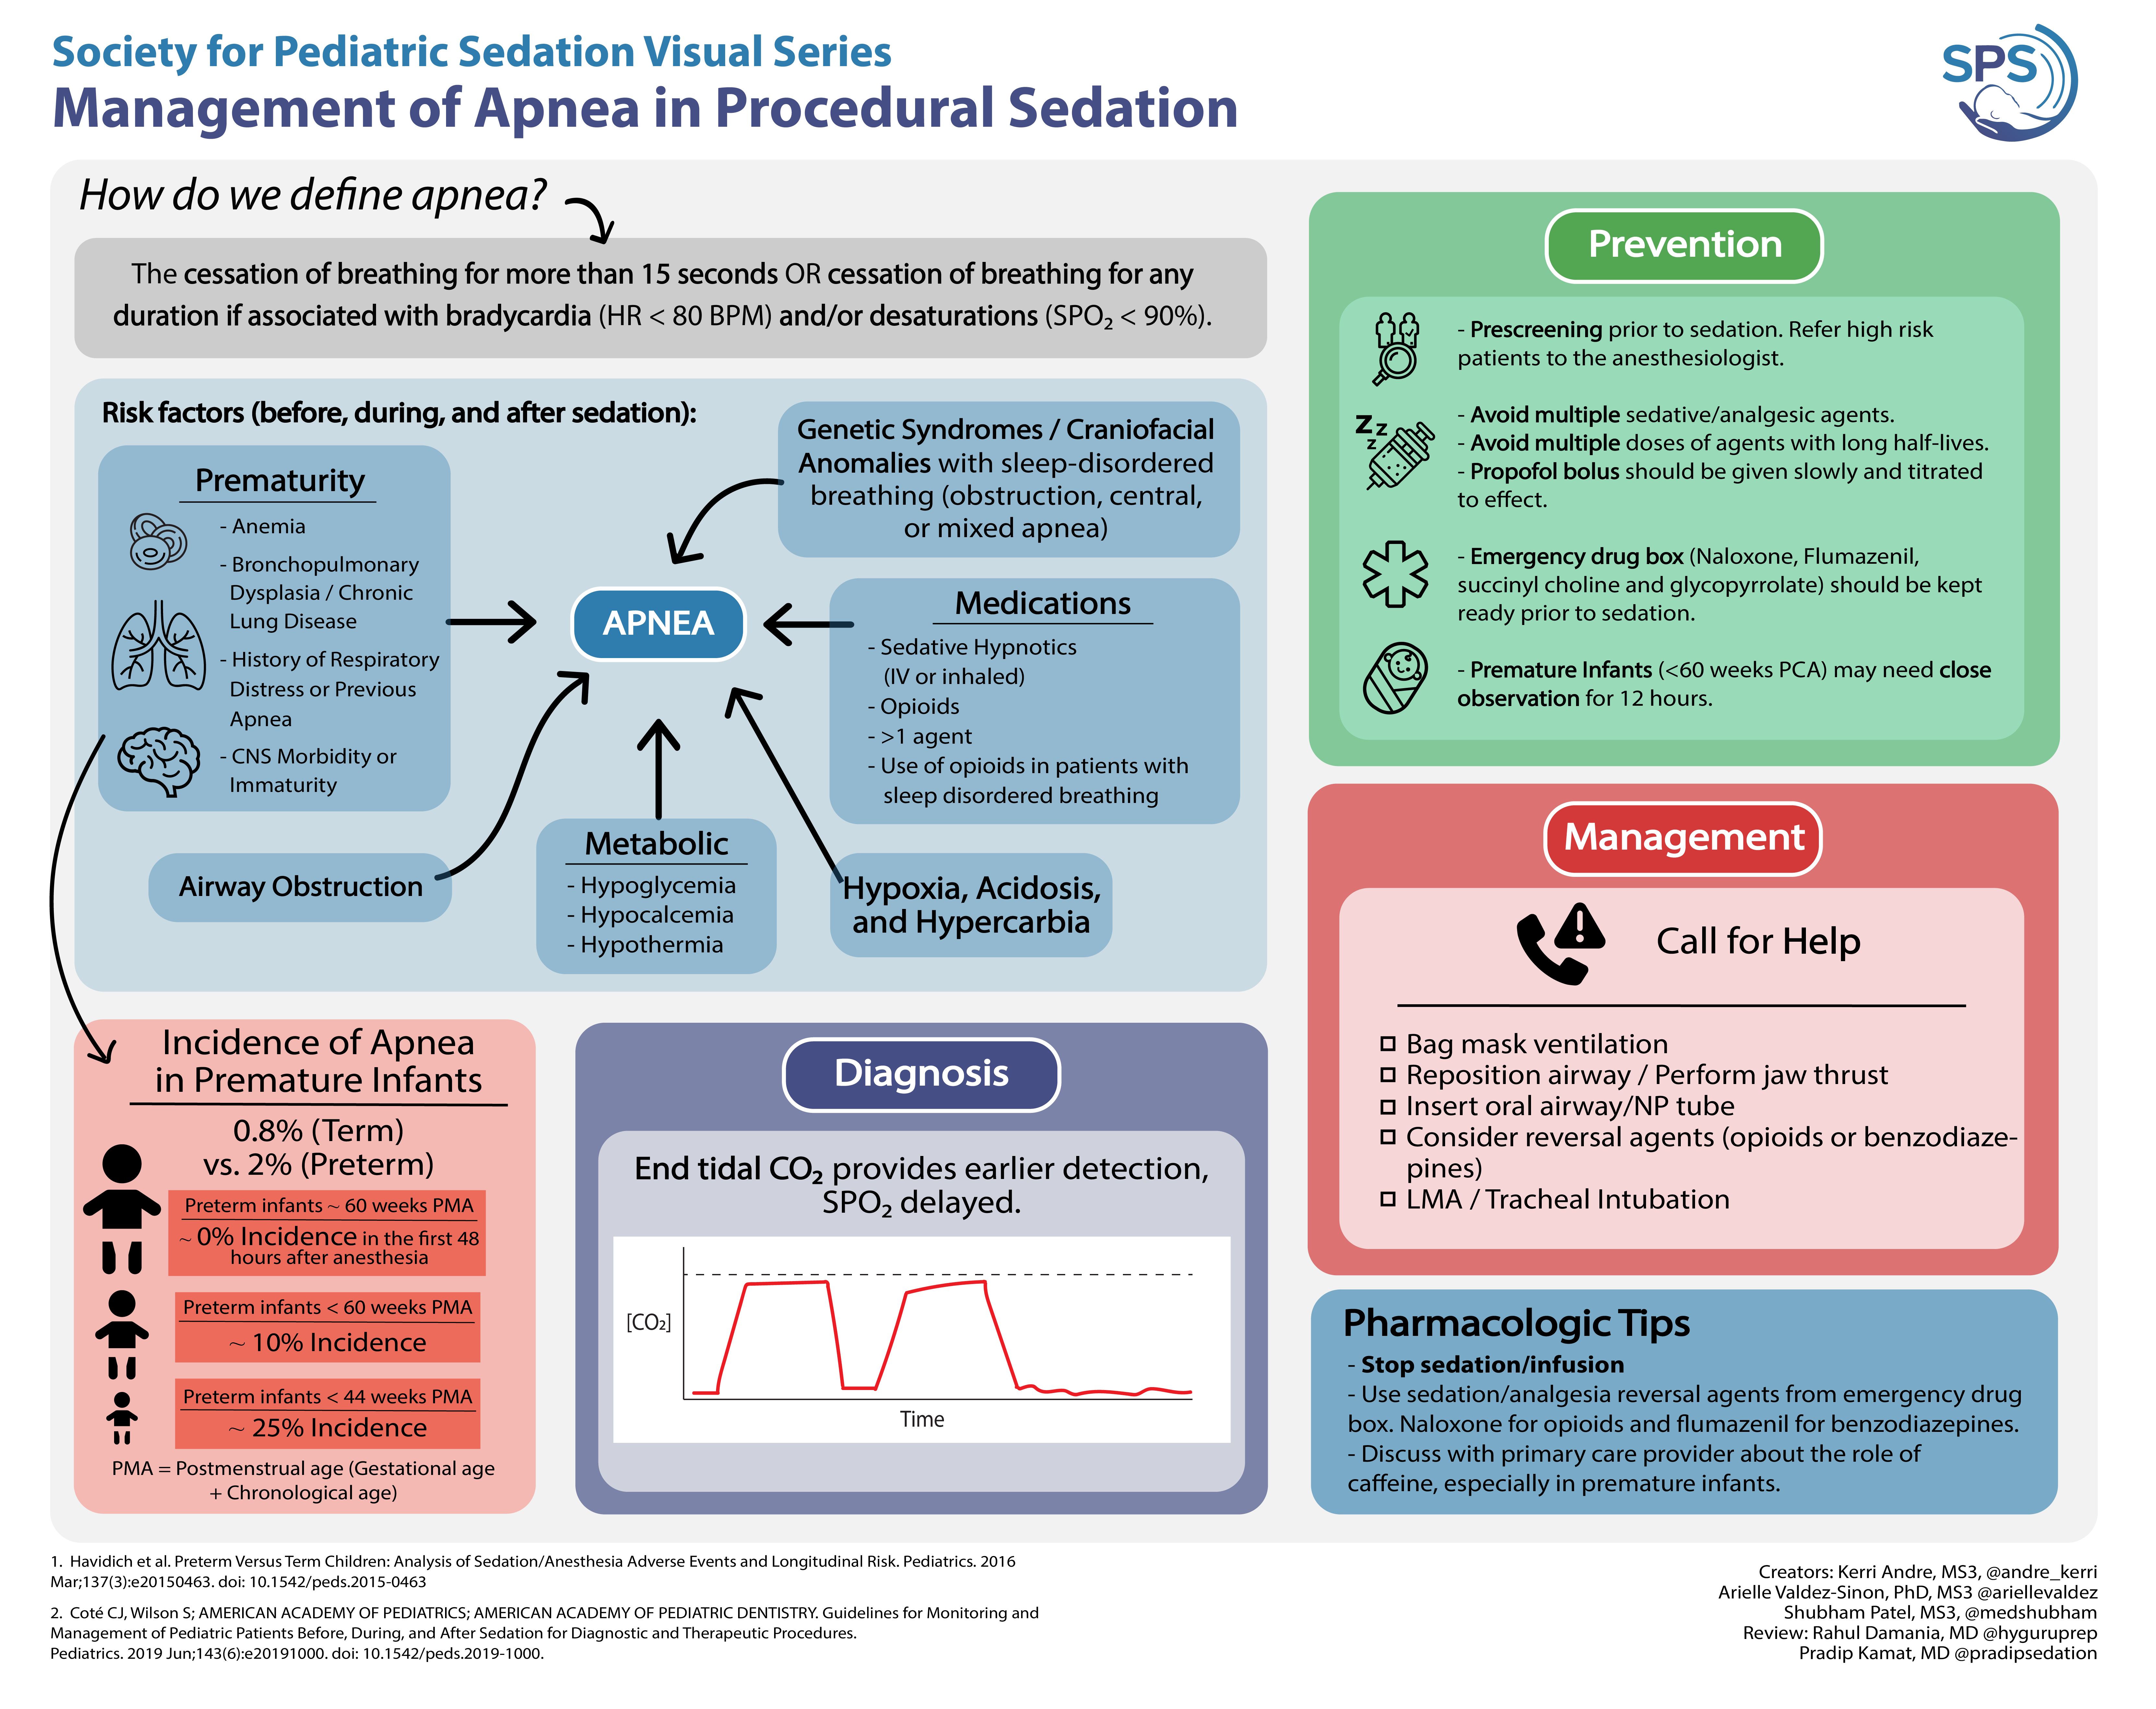 AAPD Sedation and General Anesthesia Safety